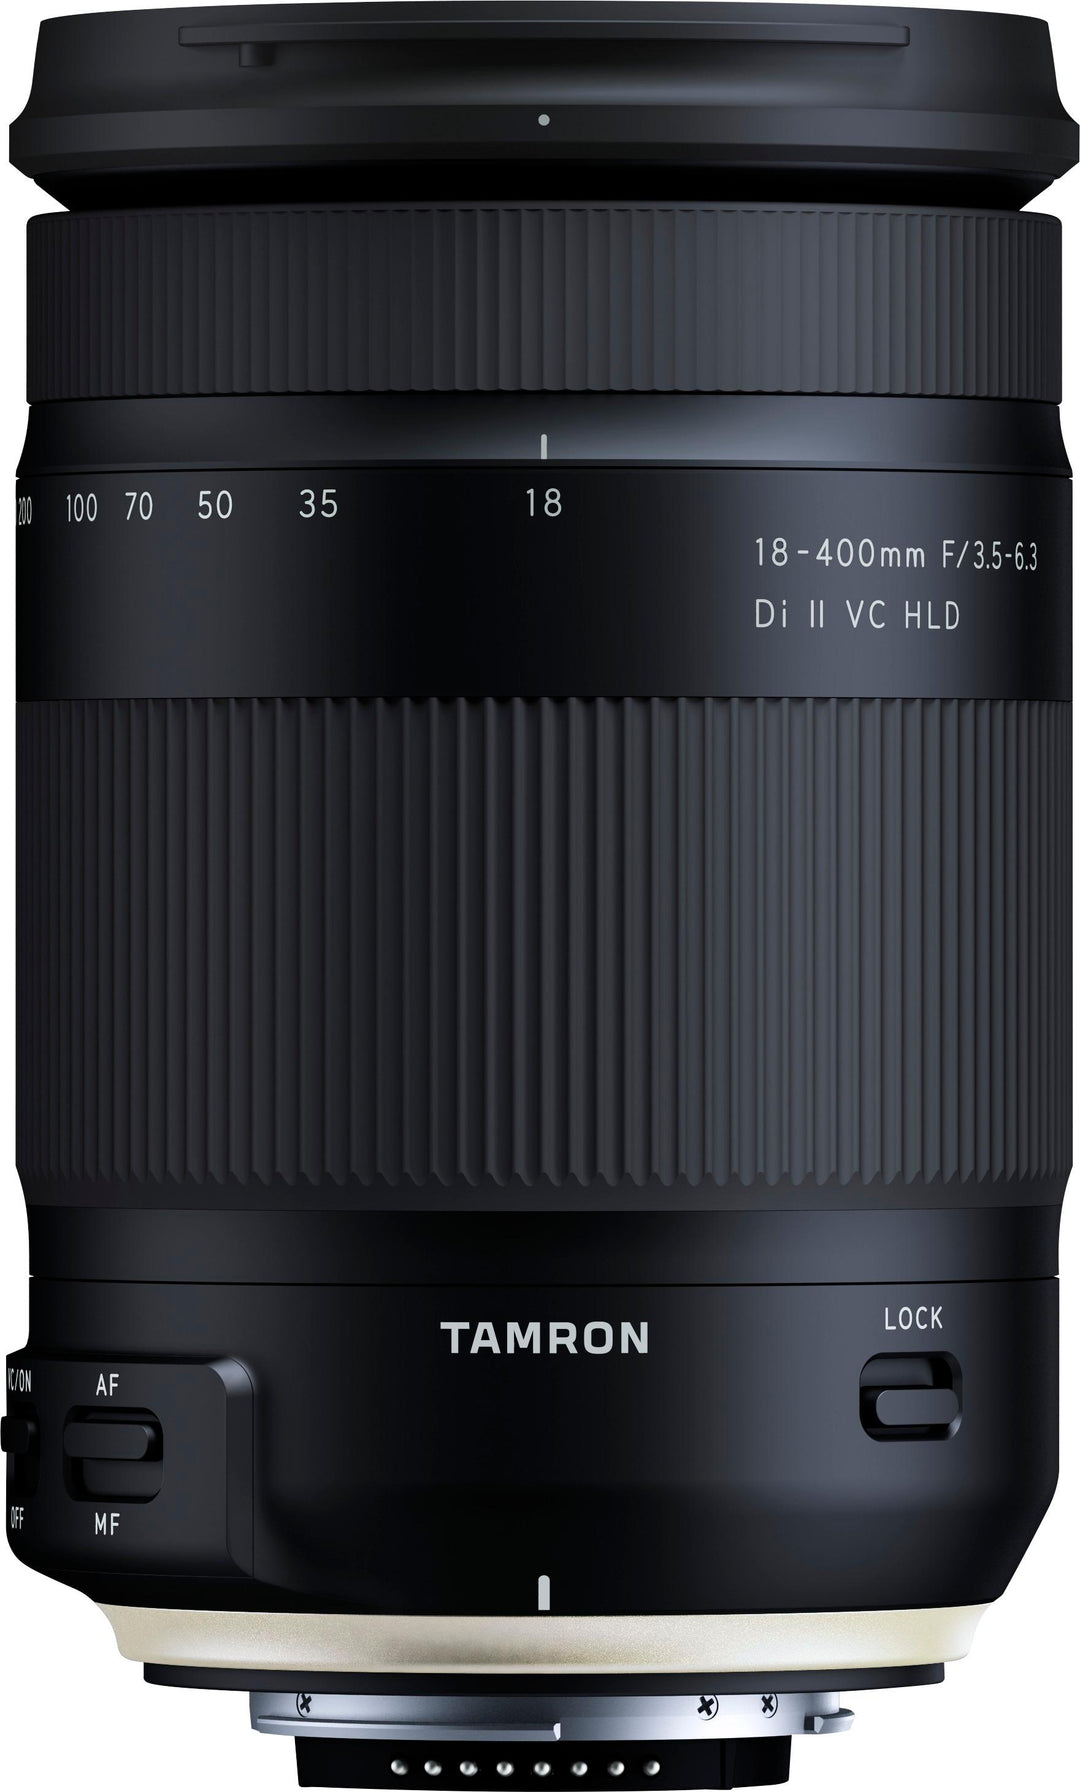 Tamron - 18-400mm F/3.5-6.3 Di II VC HLD All-In-One Telephoto Lens for Nikon APS-C DSLR Cameras - black_0